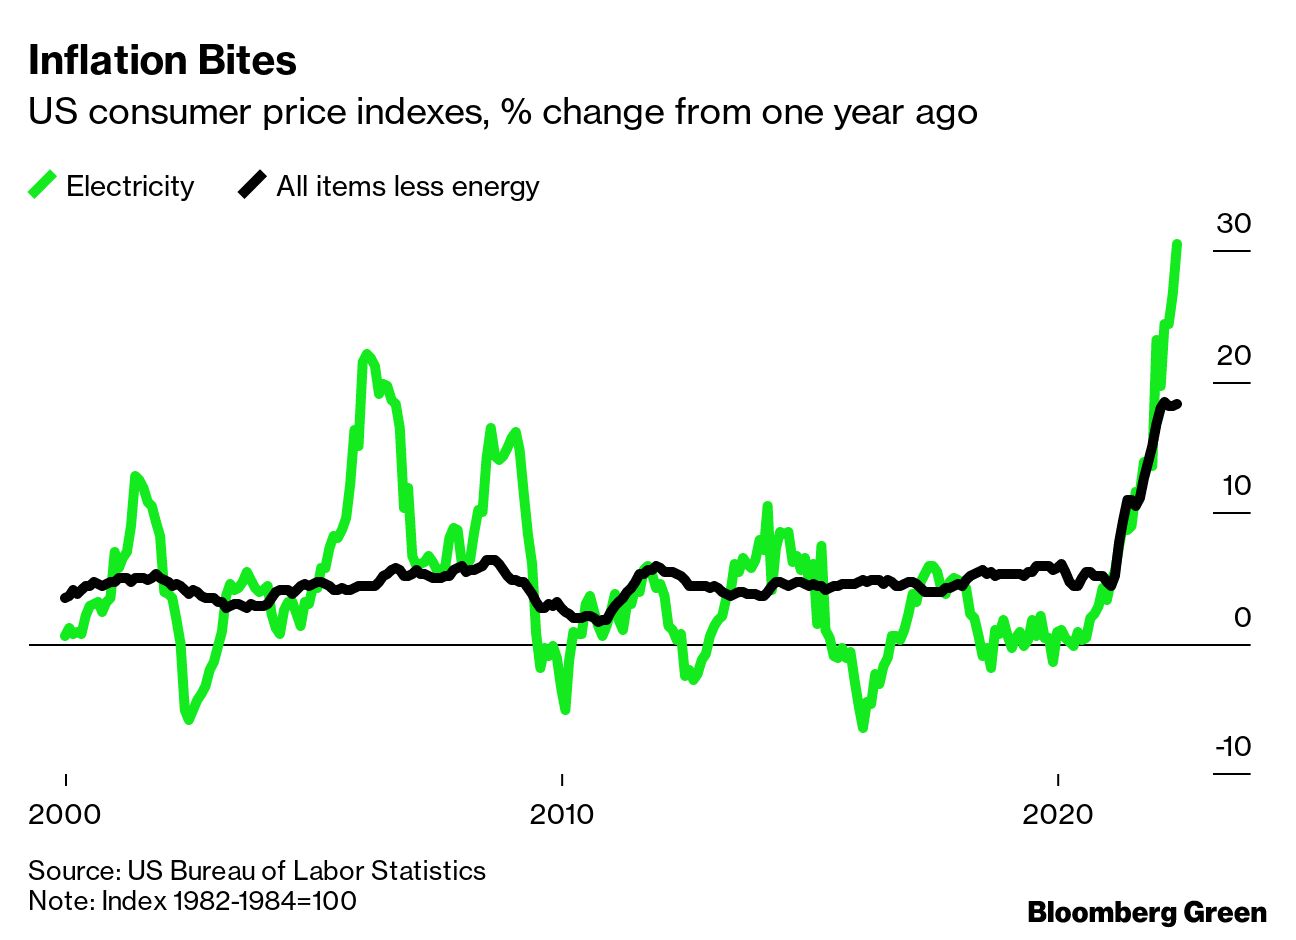 EnerWisely, graph, electricity prices increase versus consumer price index and inflation by Bloomberg